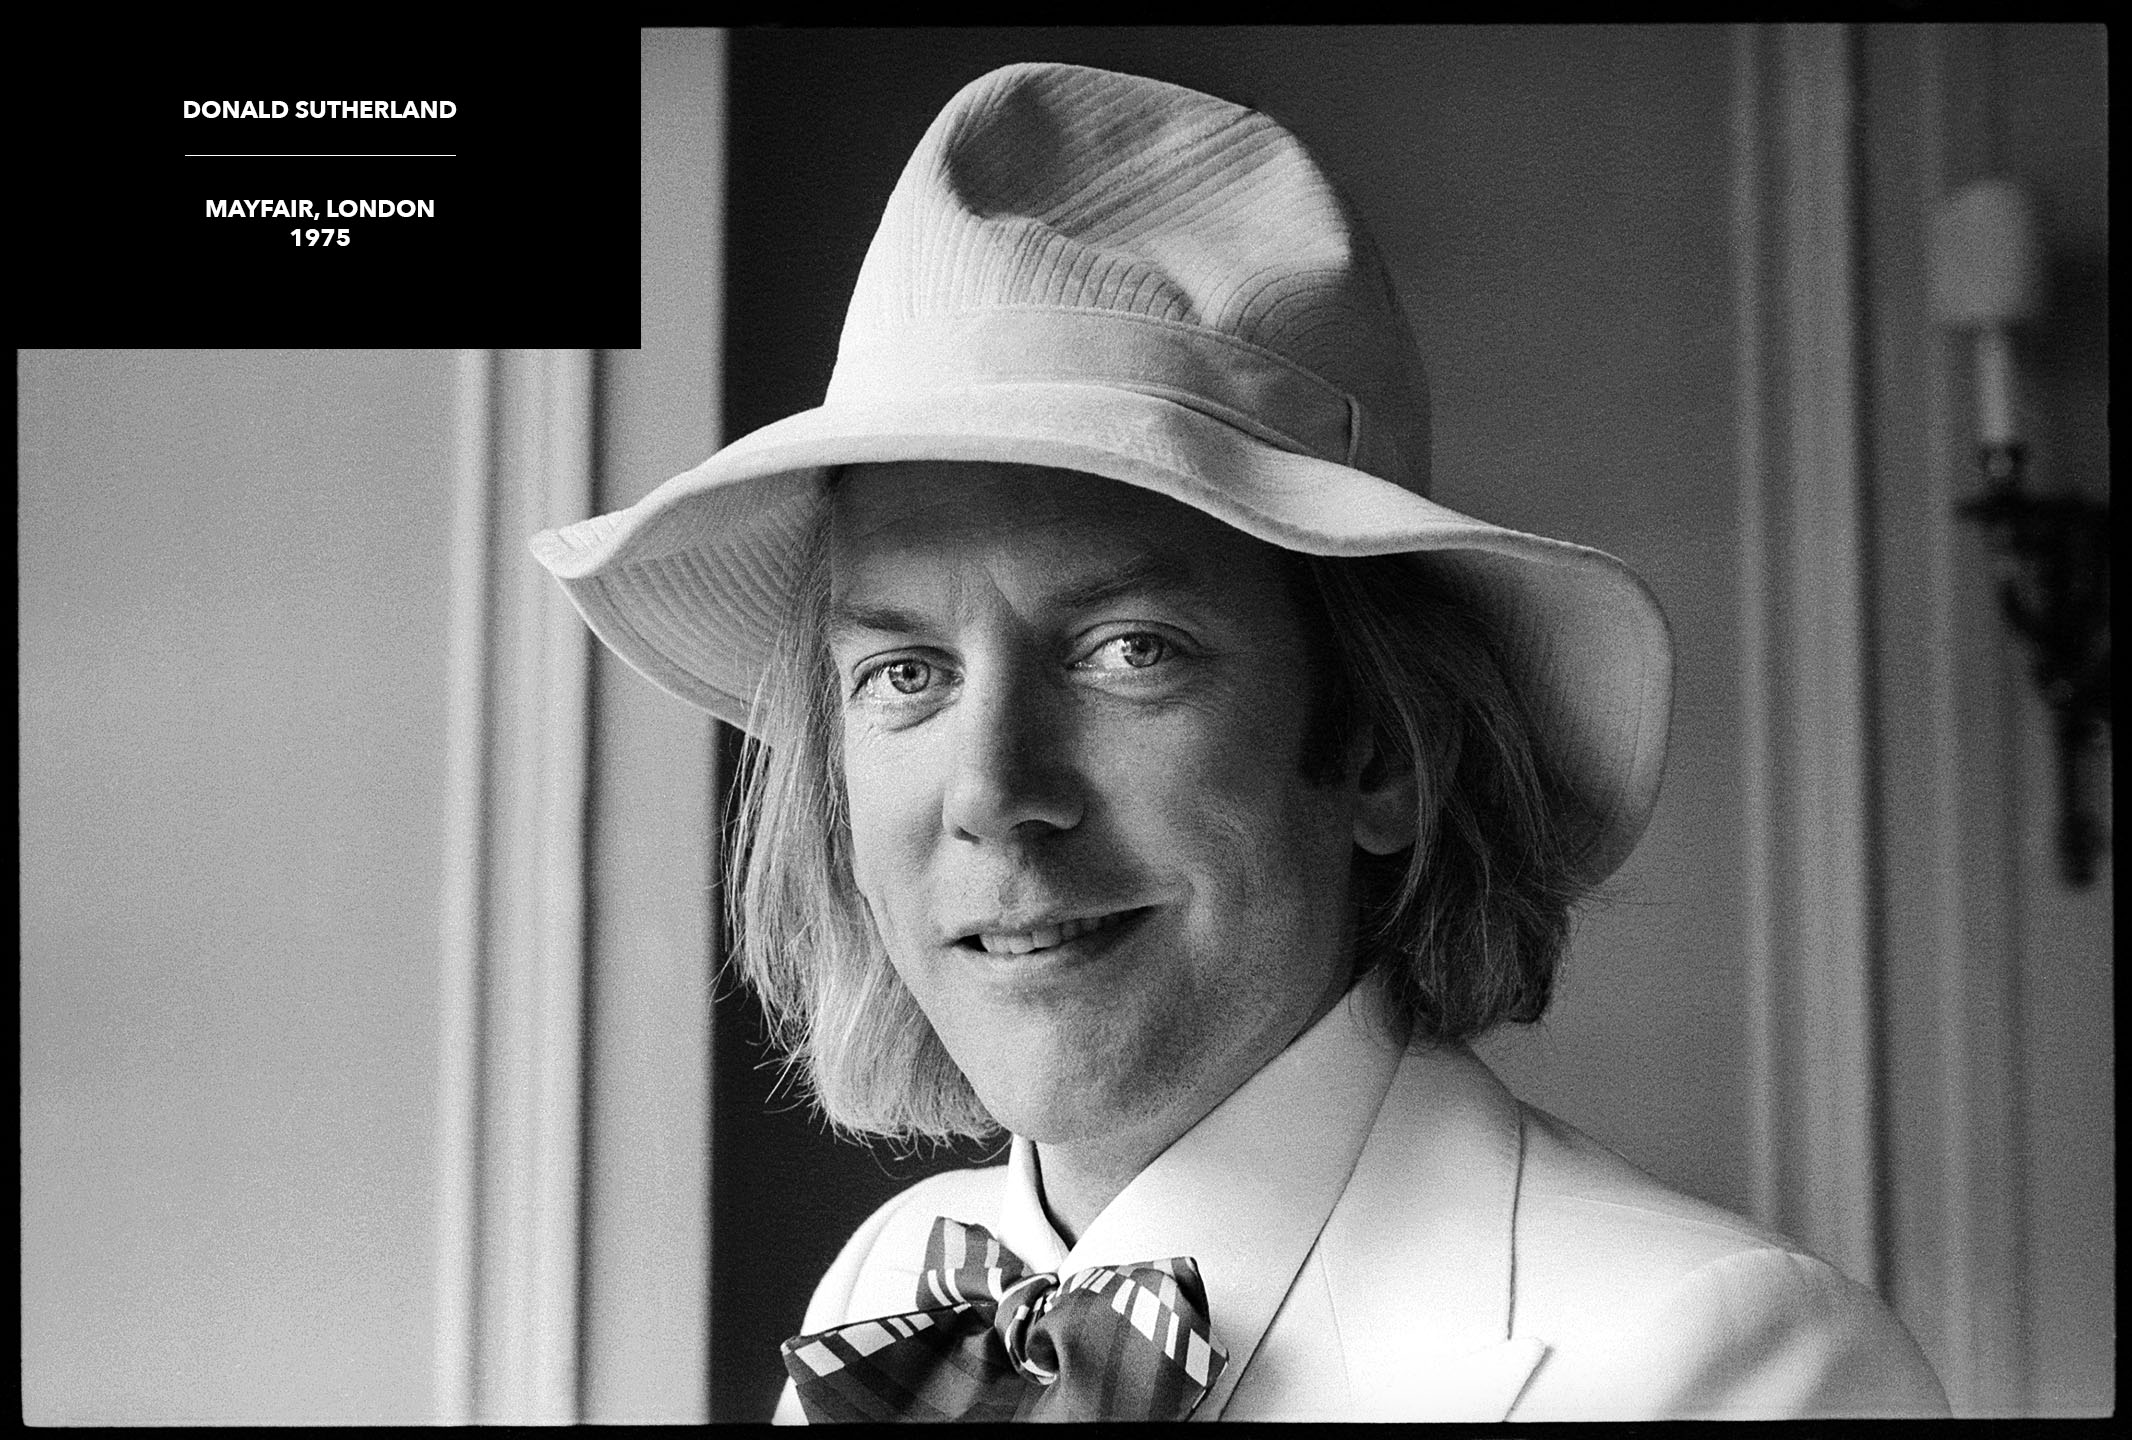 portrait of donald sutherland by arthur steel